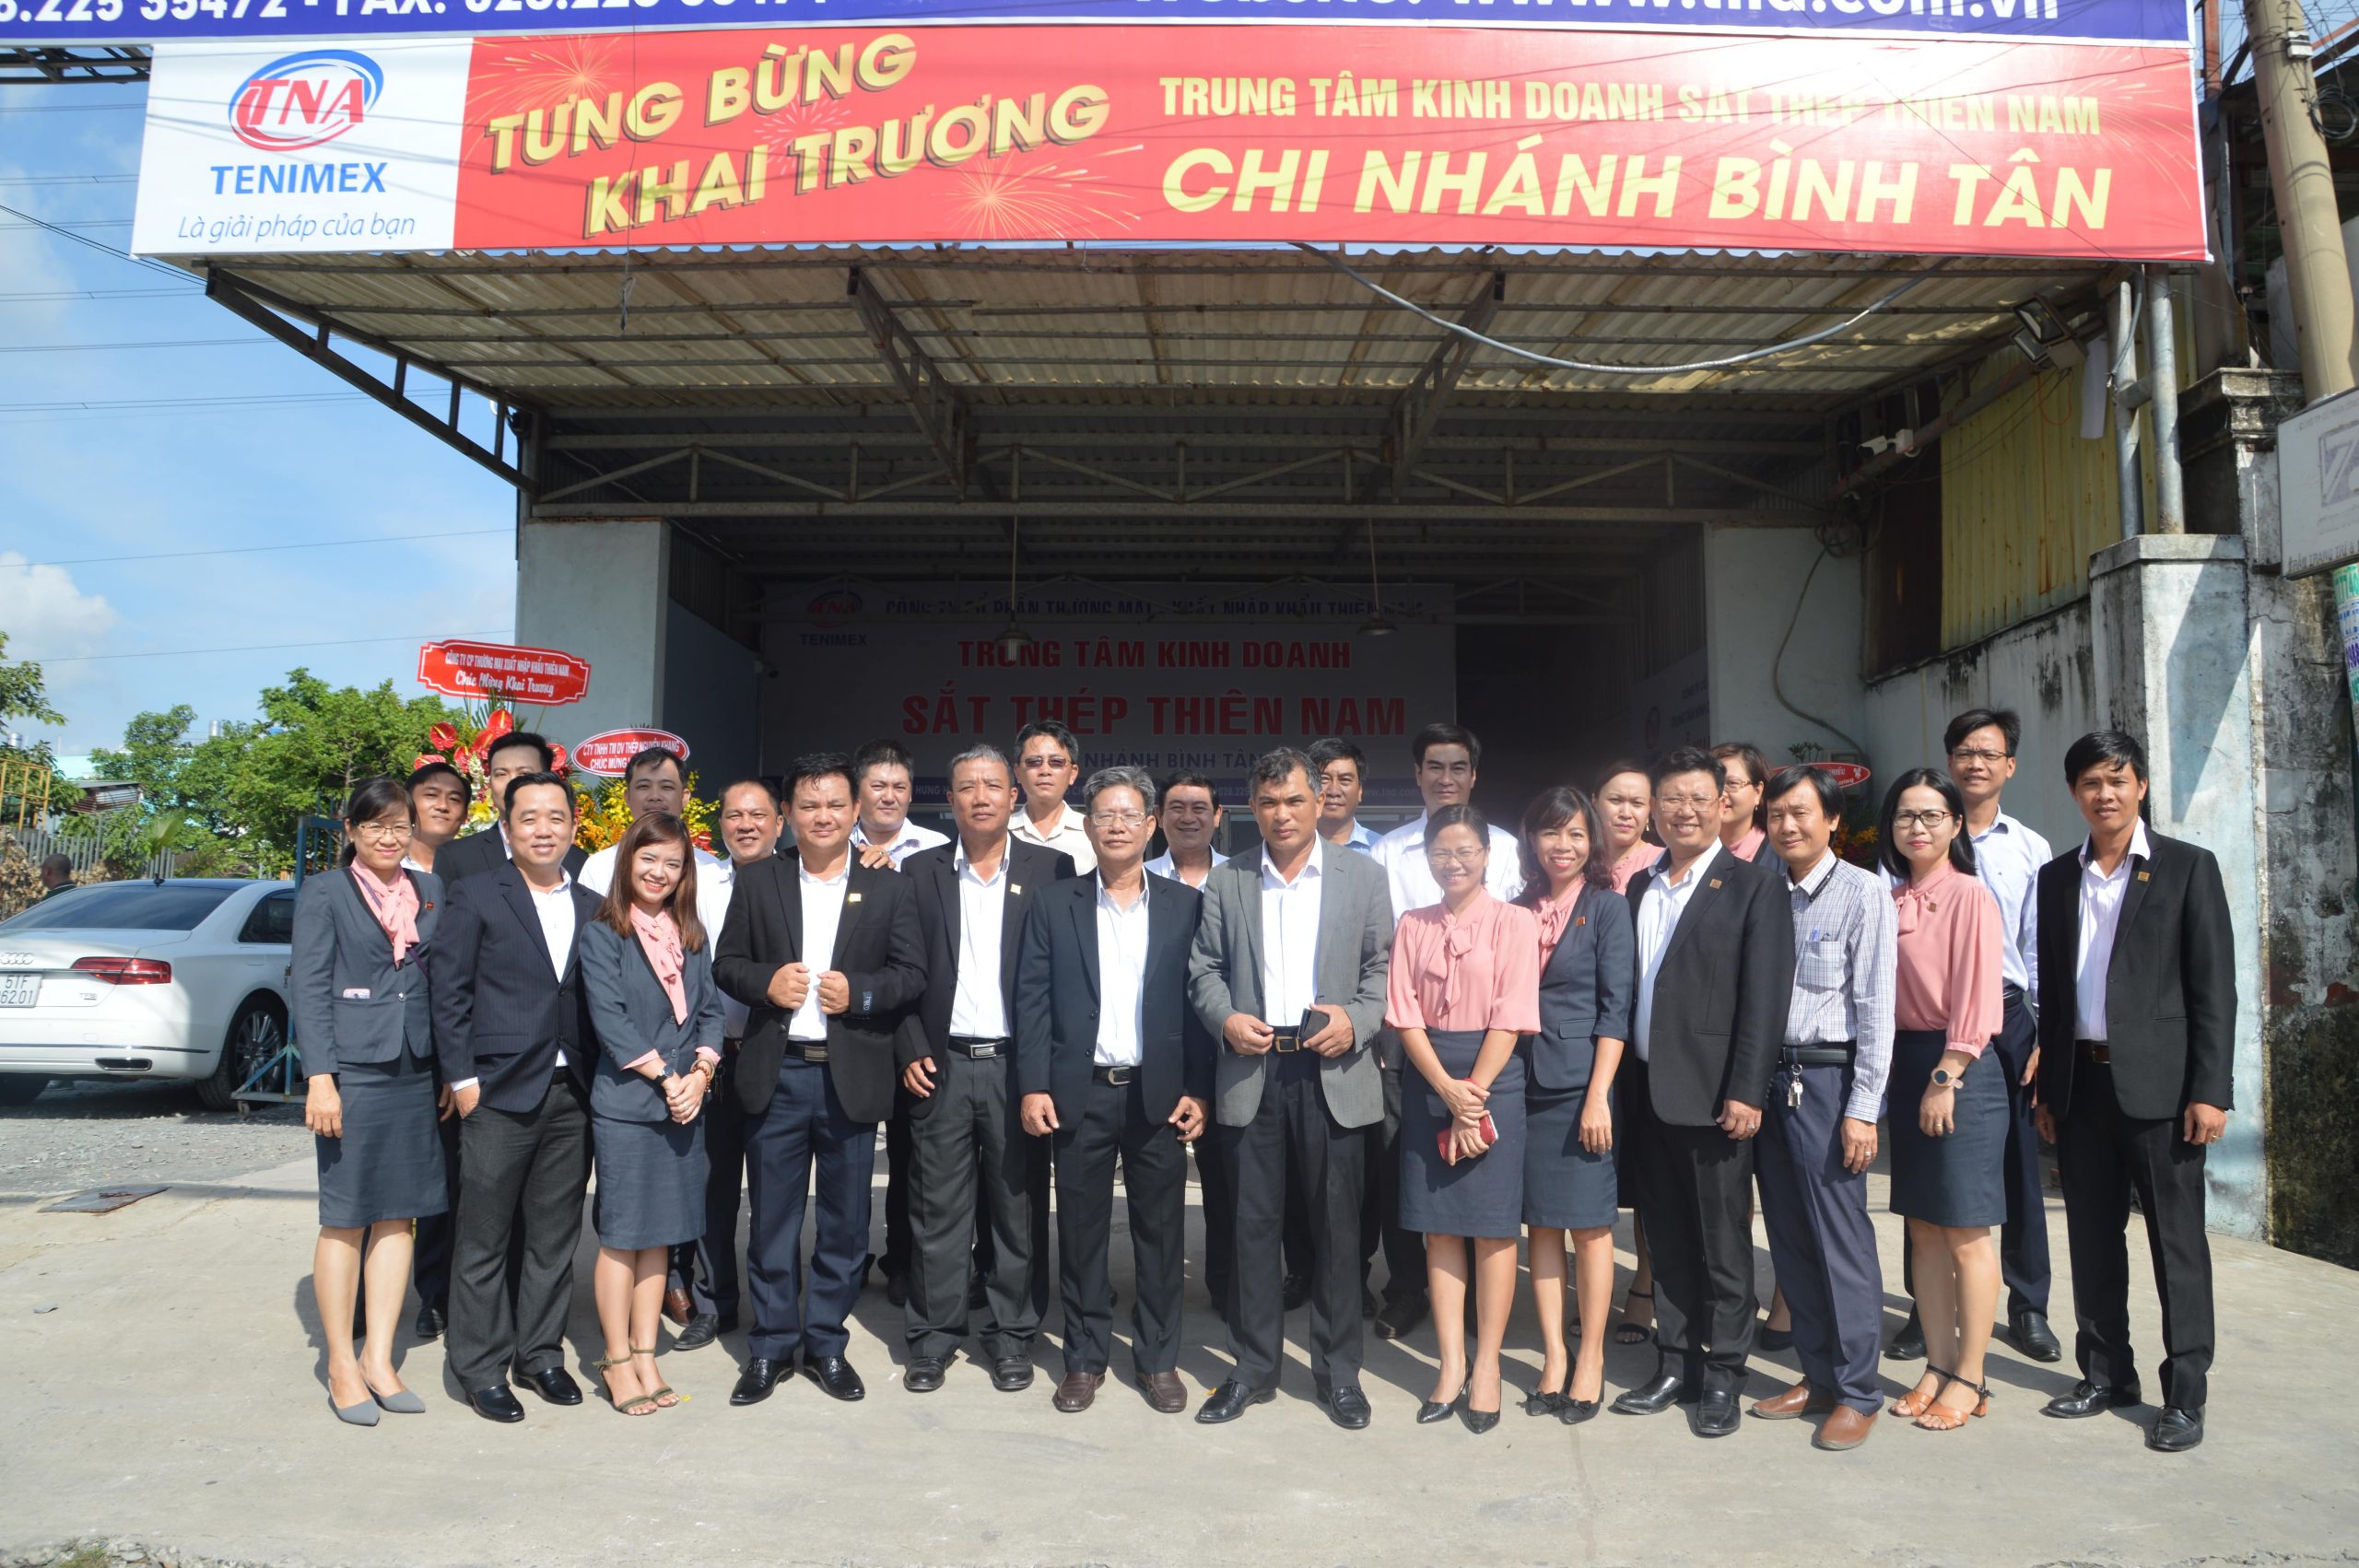 OPENING THIEN NAM STEEL BUSINESS CENTER IN BINH TAN DISTRICT HO CHI MINH CITY